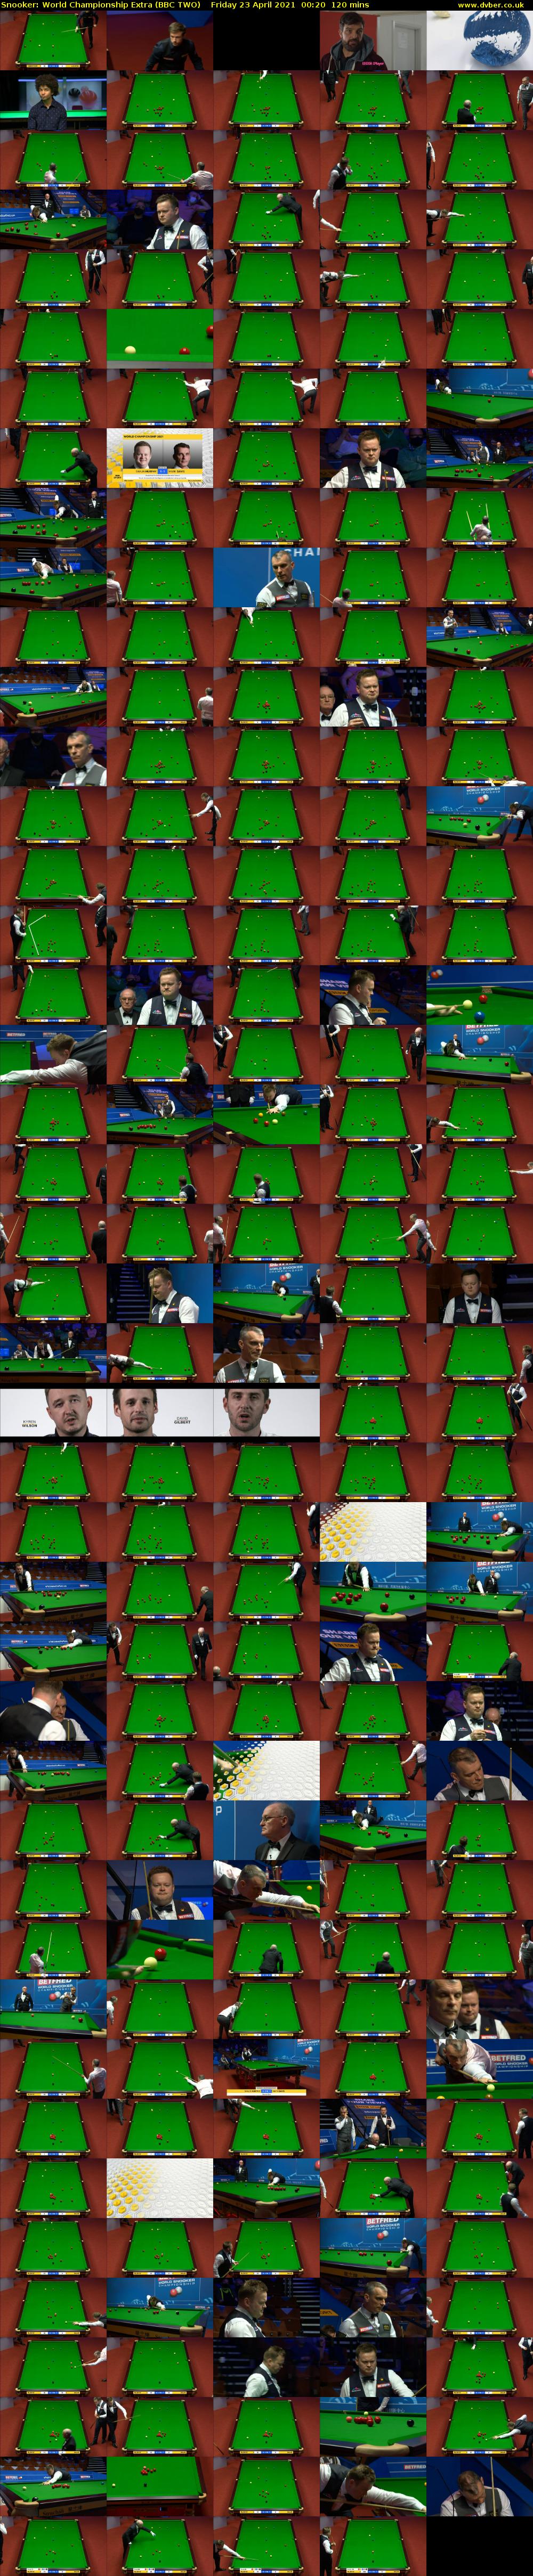 Snooker: World Championship Extra (BBC TWO) Friday 23 April 2021 00:20 - 02:20